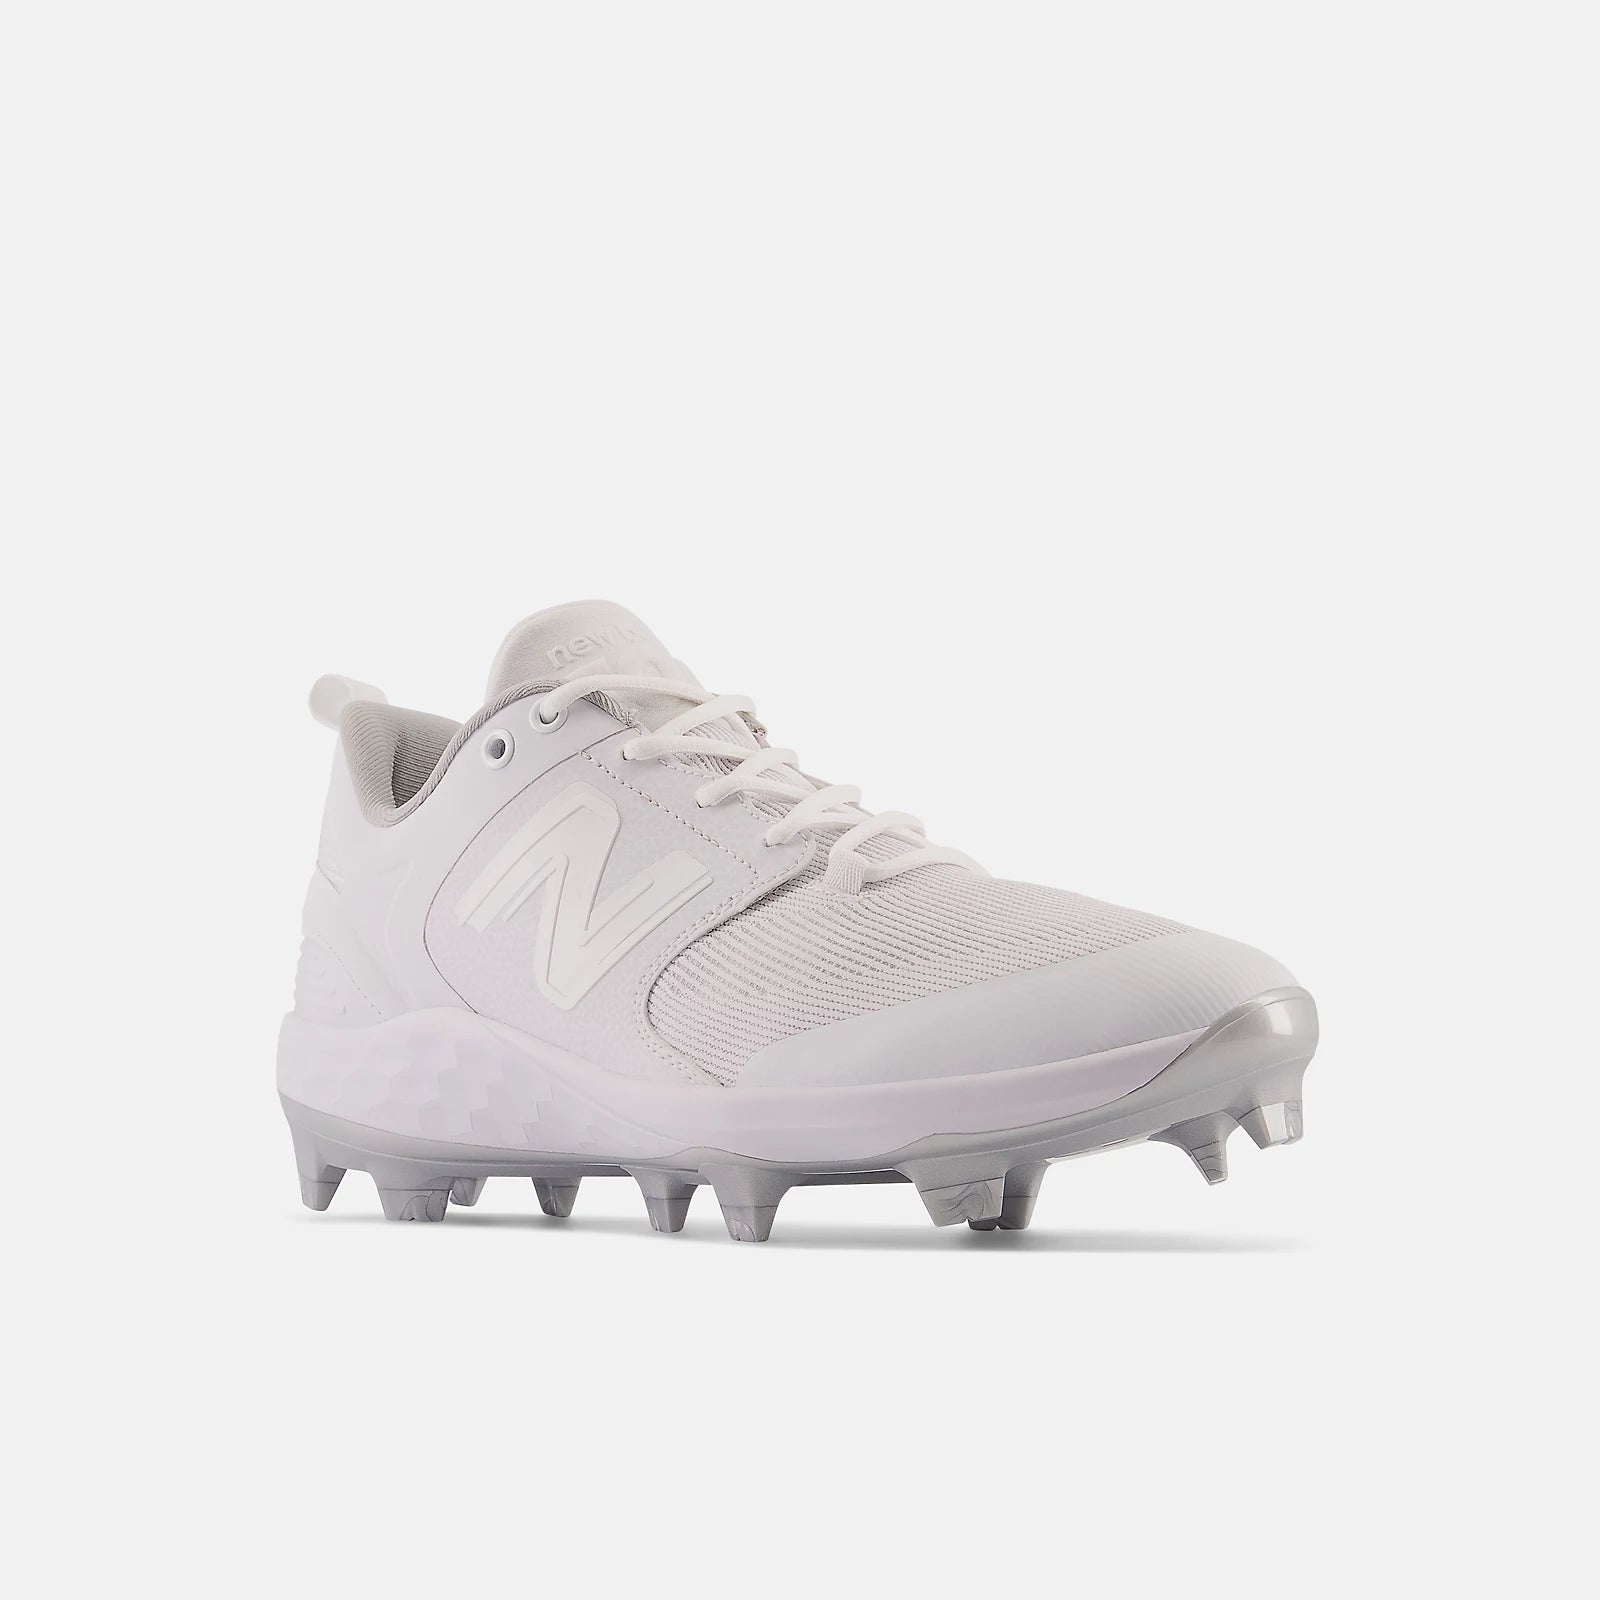 New Balance Pearls PL3000v6 Molded Cleats